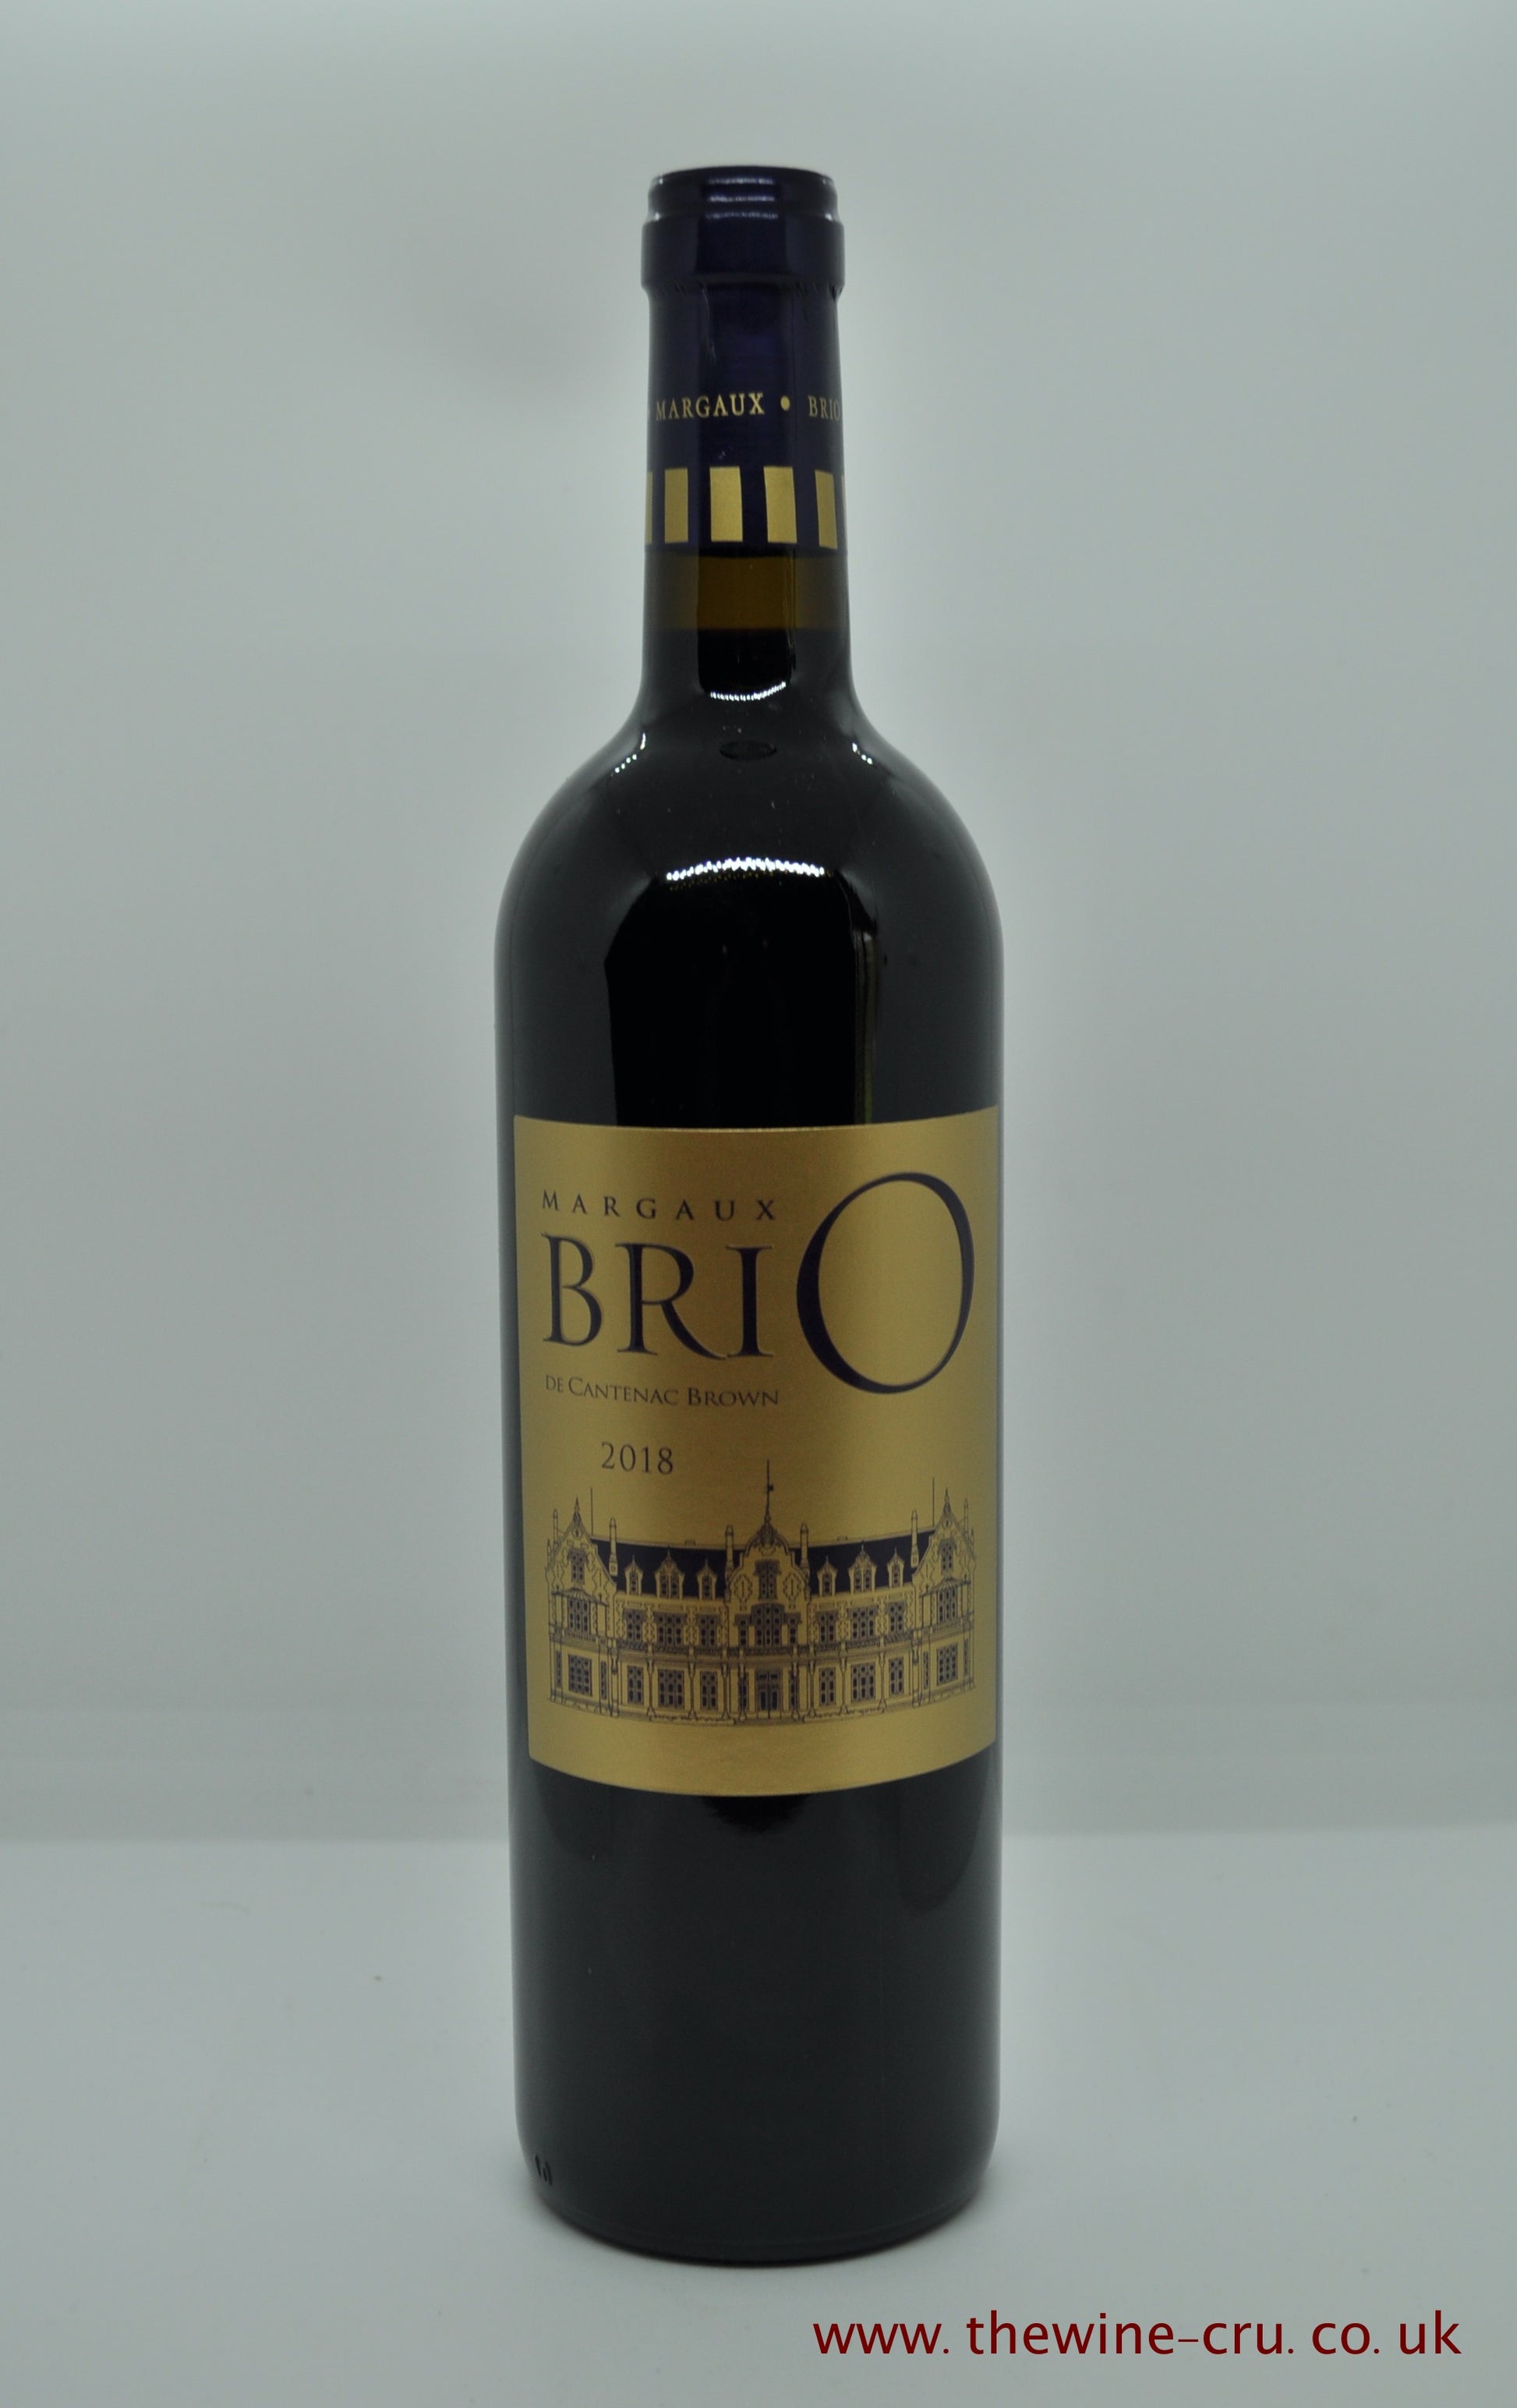 2018 vintage red wine. Brio De Chateau Cantenac Brown 2018. France Bordeaux. Immediate delivery. Free local delivery. Gift wrapping available.